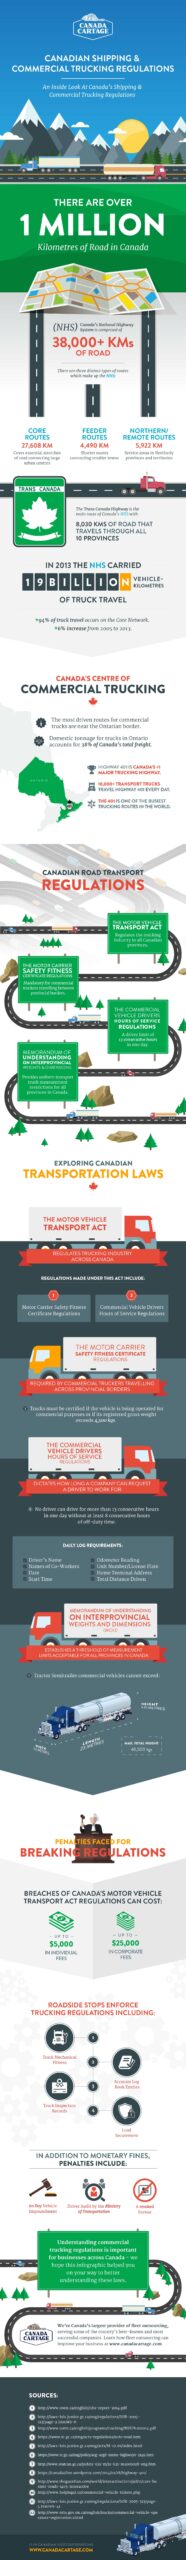 Canadian Shipping & Trucking Regulations Infographic